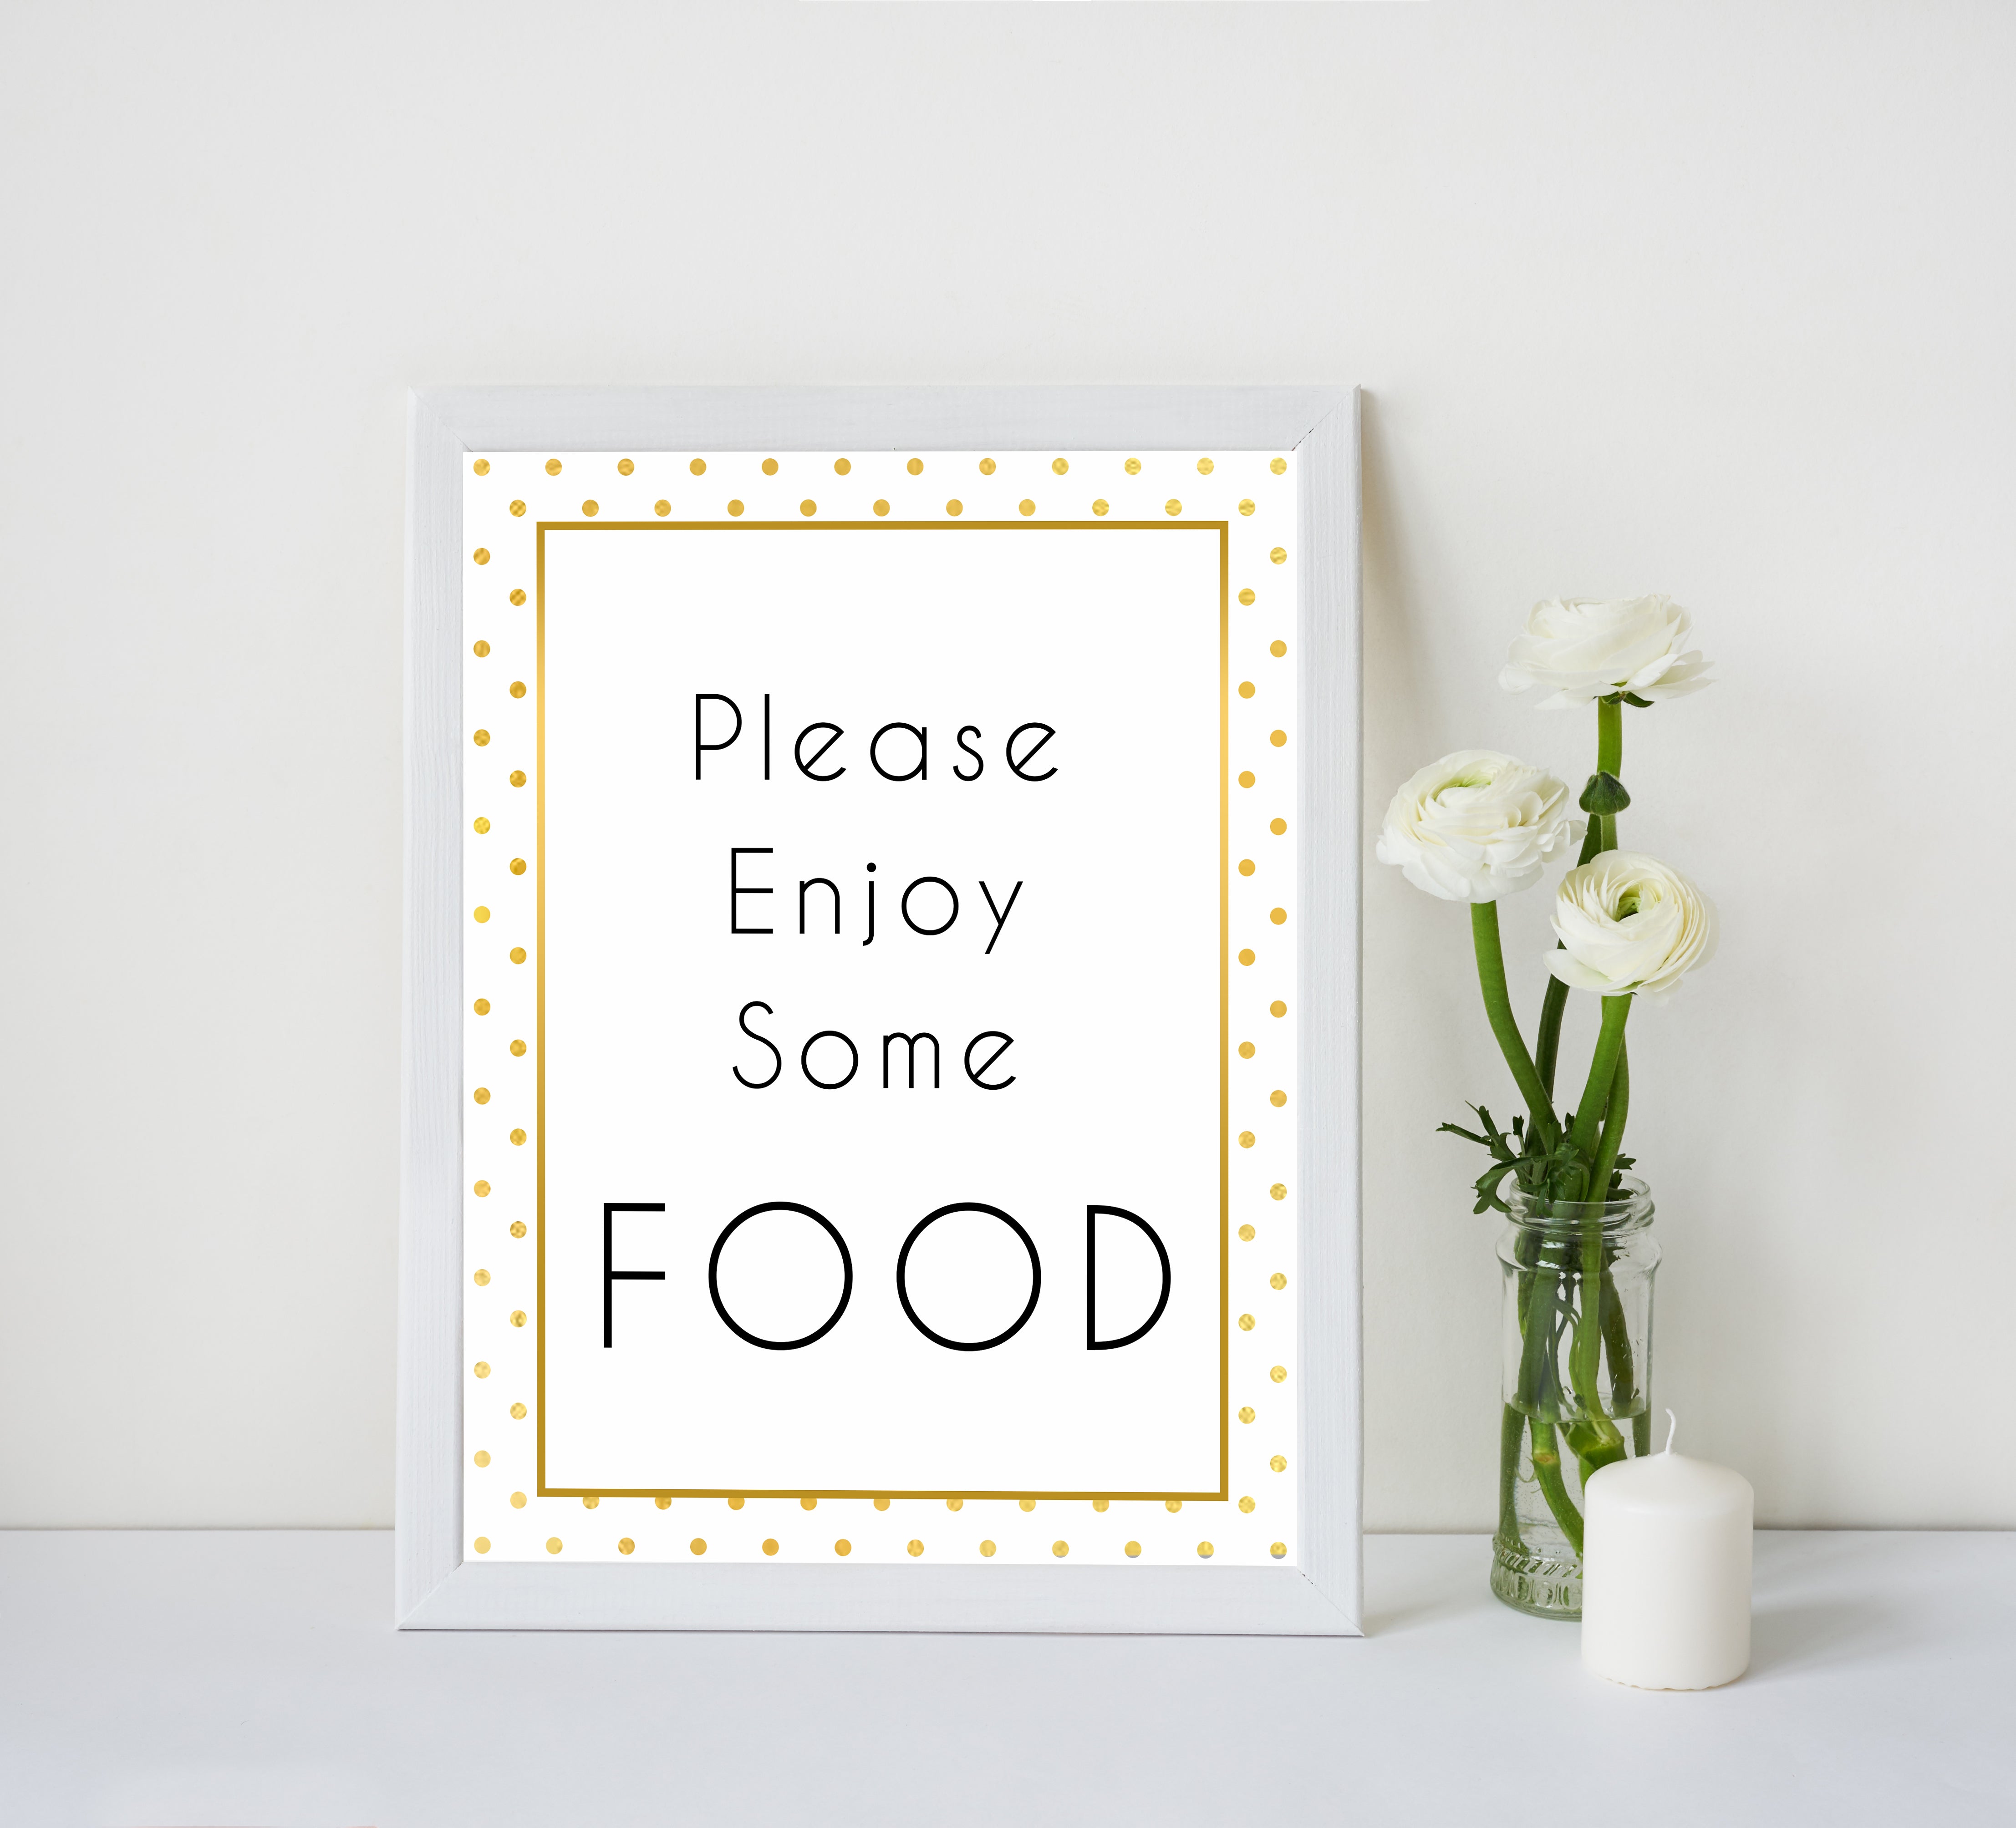 foods baby table signs, food table signs, Baby gold dots baby decor, printable baby table signs, printable baby decor, baby gold glitter table signs, fun baby signs, baby gold fun baby table signs